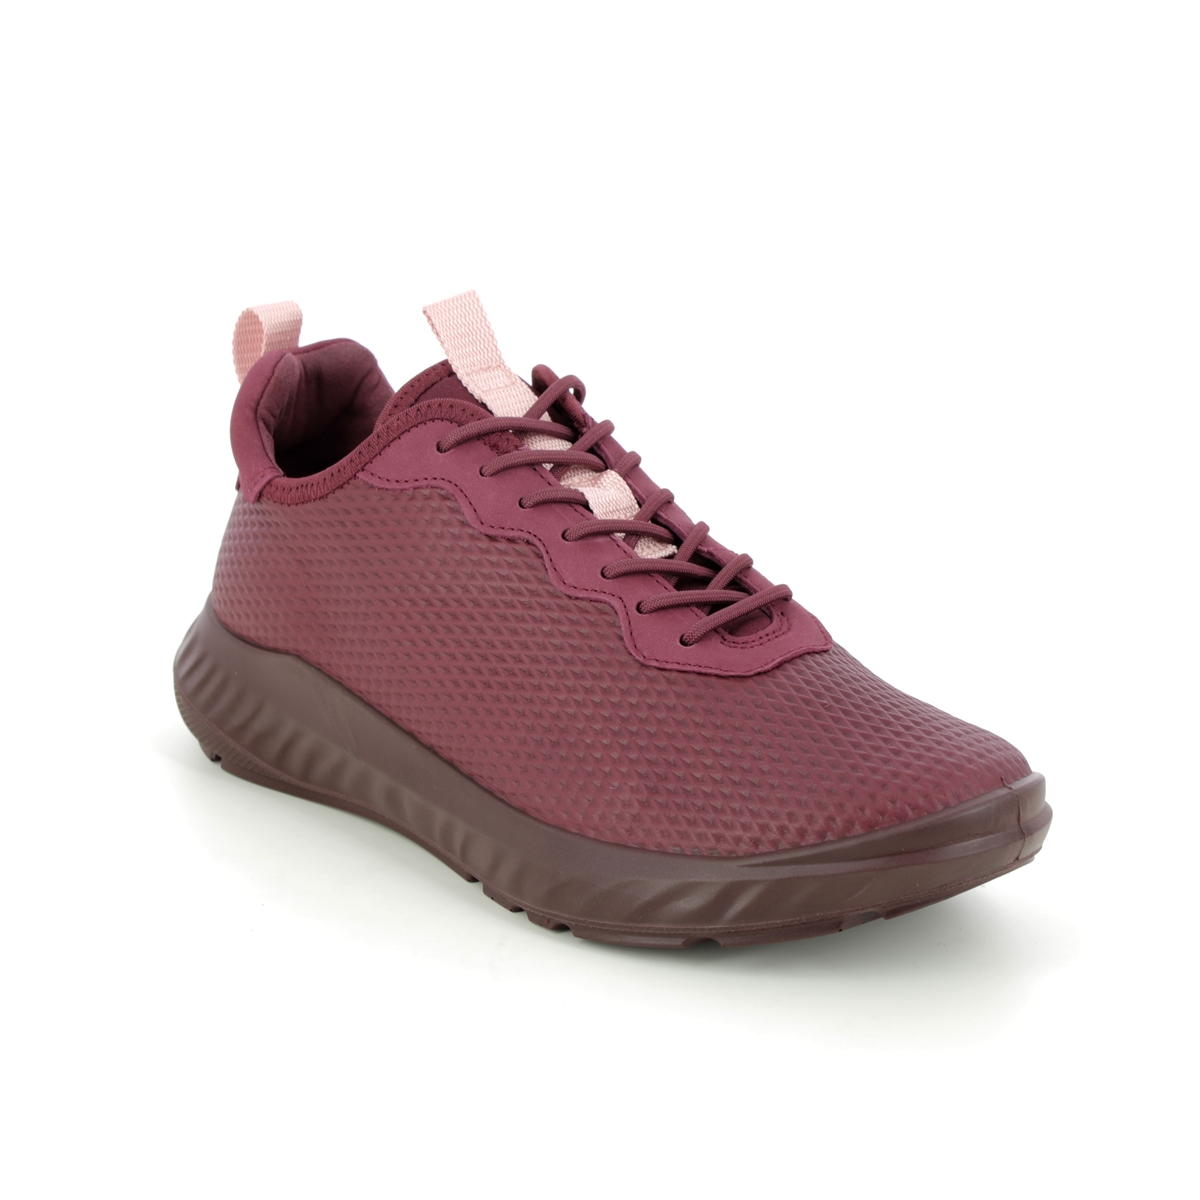 Ecco Ath 1Fw Plum Womens Trainers 834903-60501 In Size 40 In Plain Plum